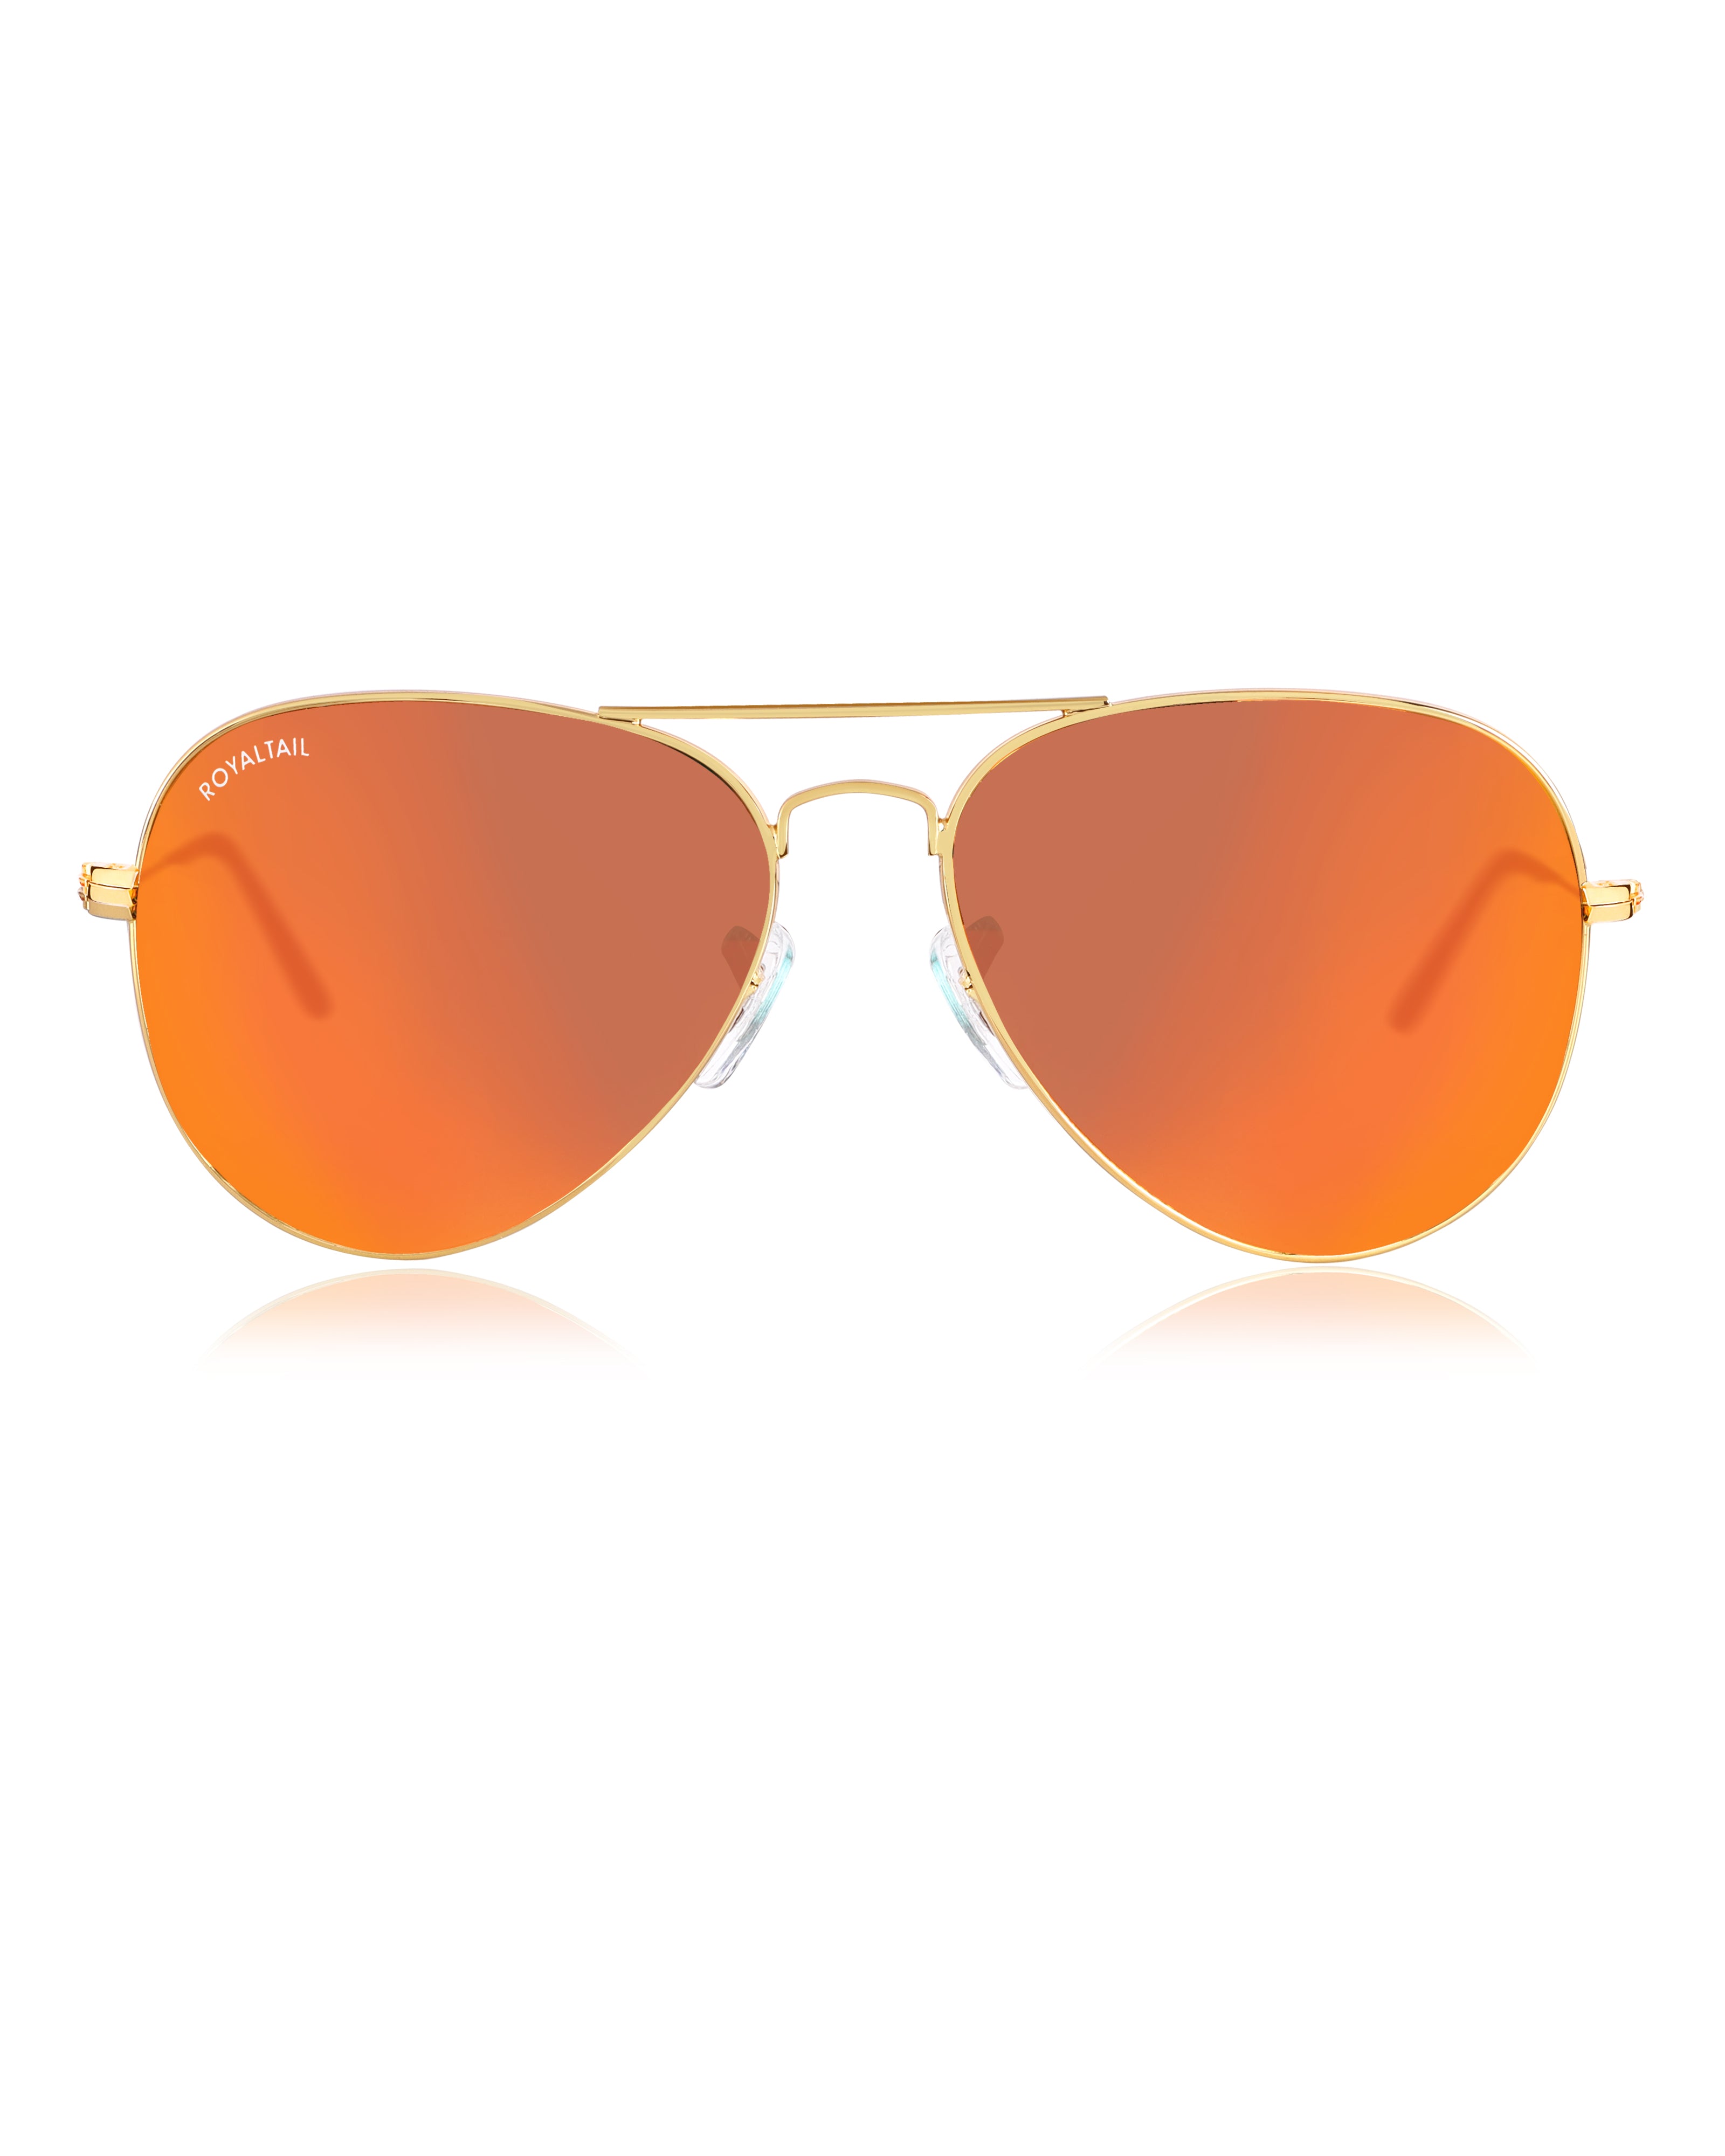 Buy Green Classic Glass and Gold Frame Aviator Sunglasses For Men and Women  – Royaltail